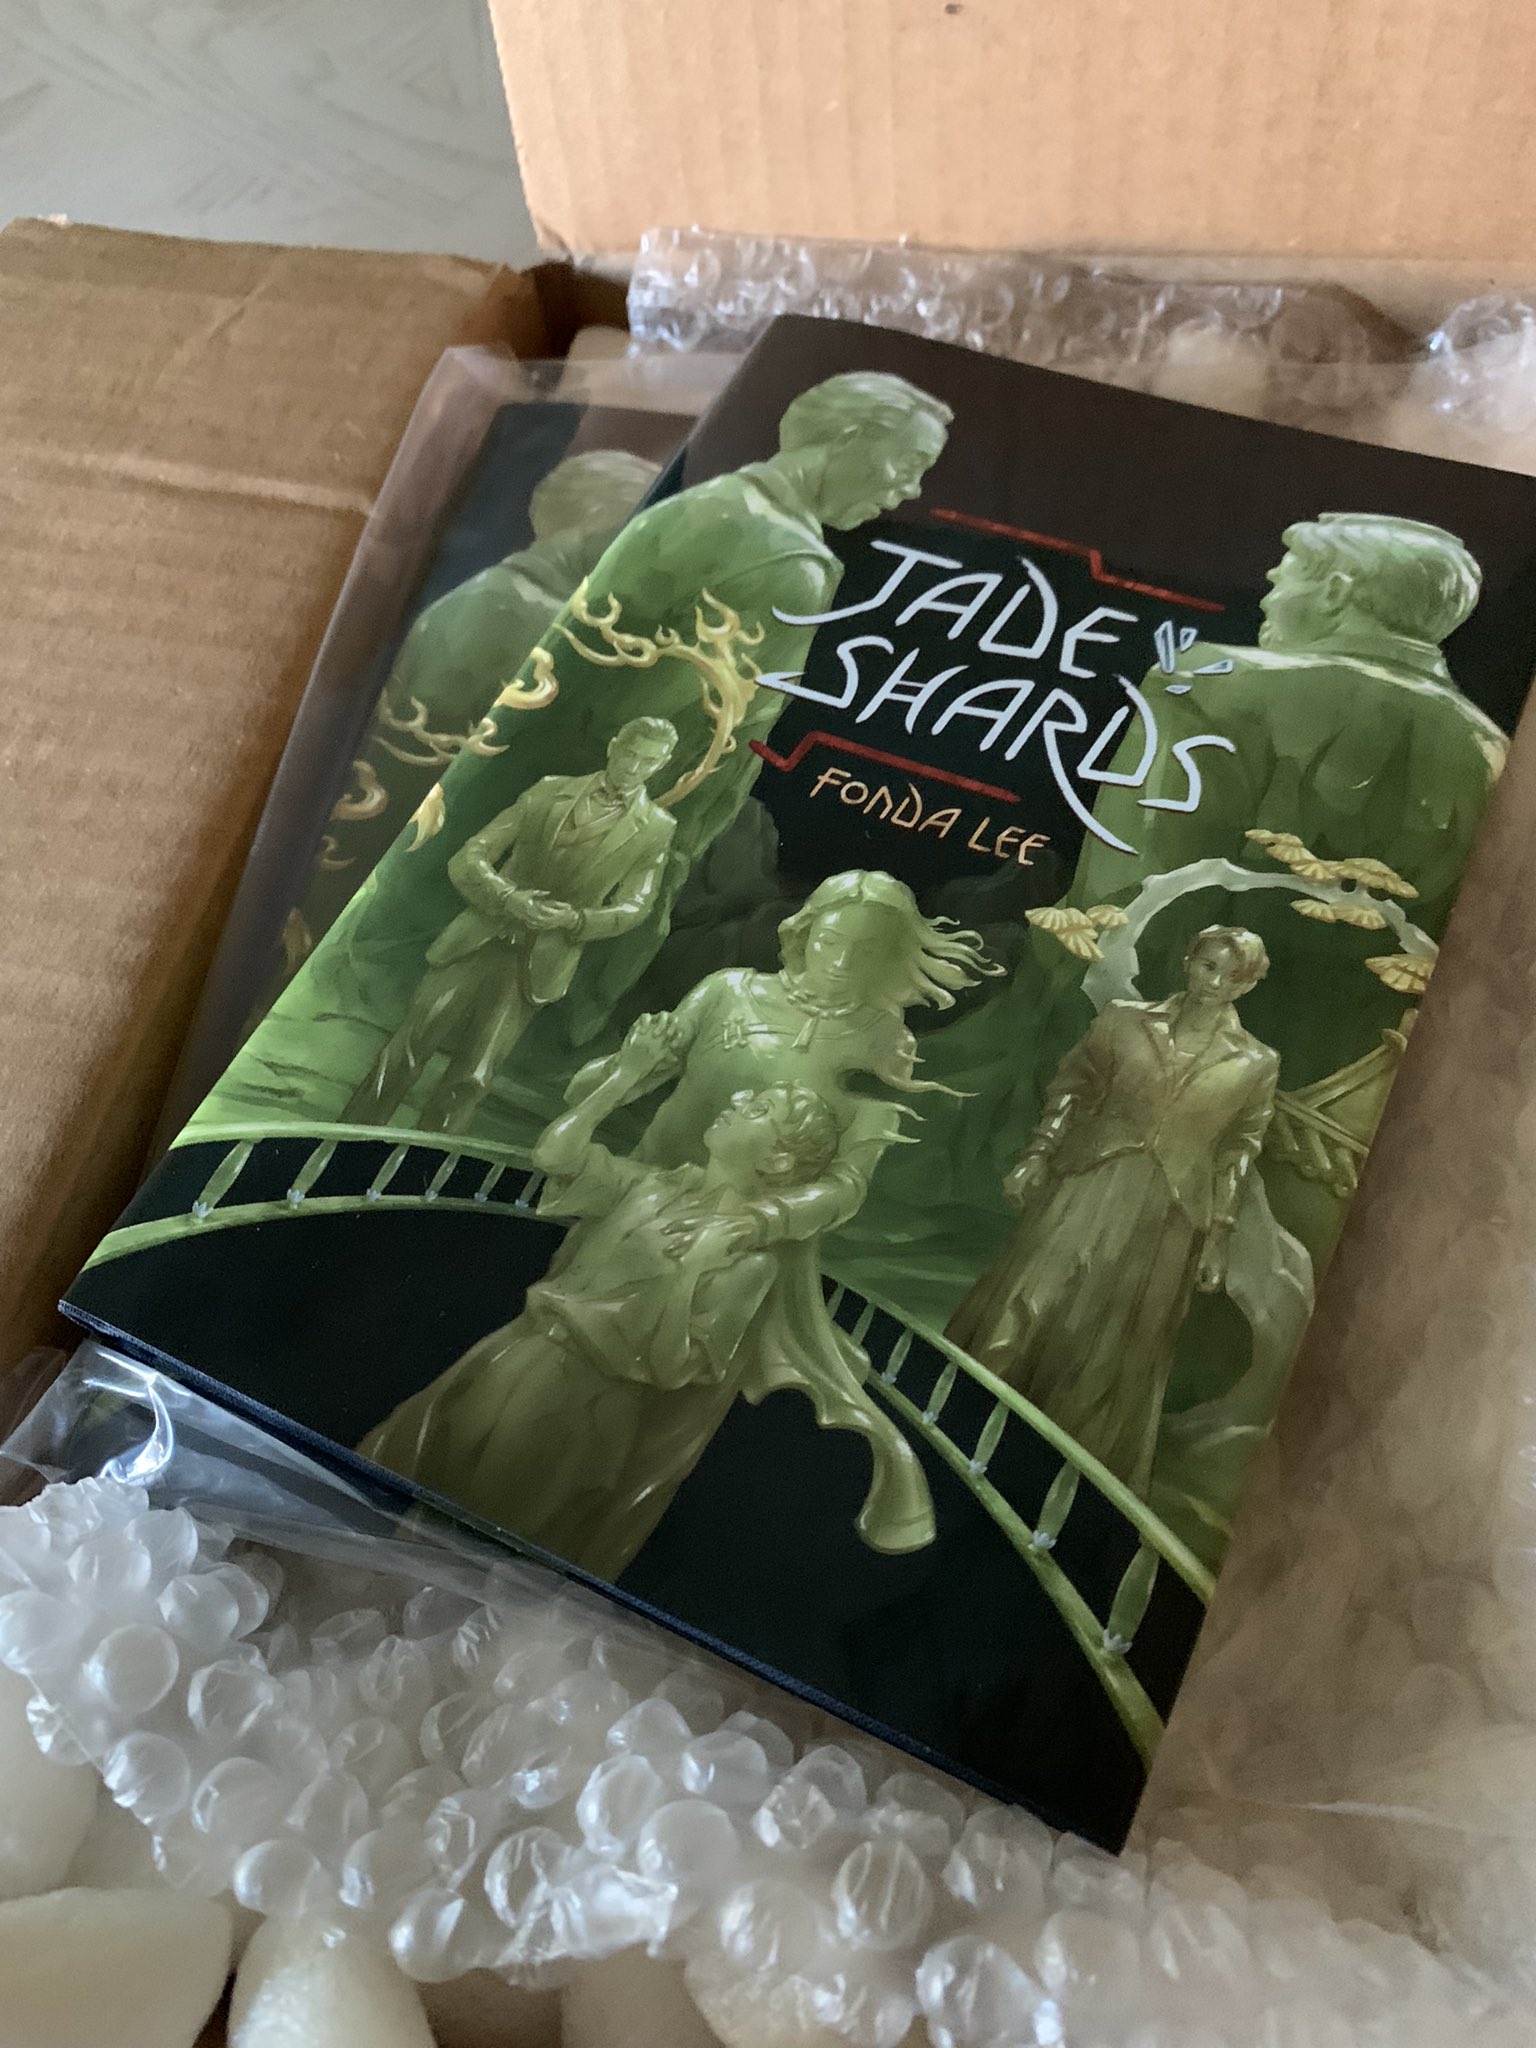 Fonda Lee on X: "JADE SHARDS has shipped! The copies that just arrived on  my doorstep are as beautiful as I anticipated. Hard to believe this final  piece of the Green Bone